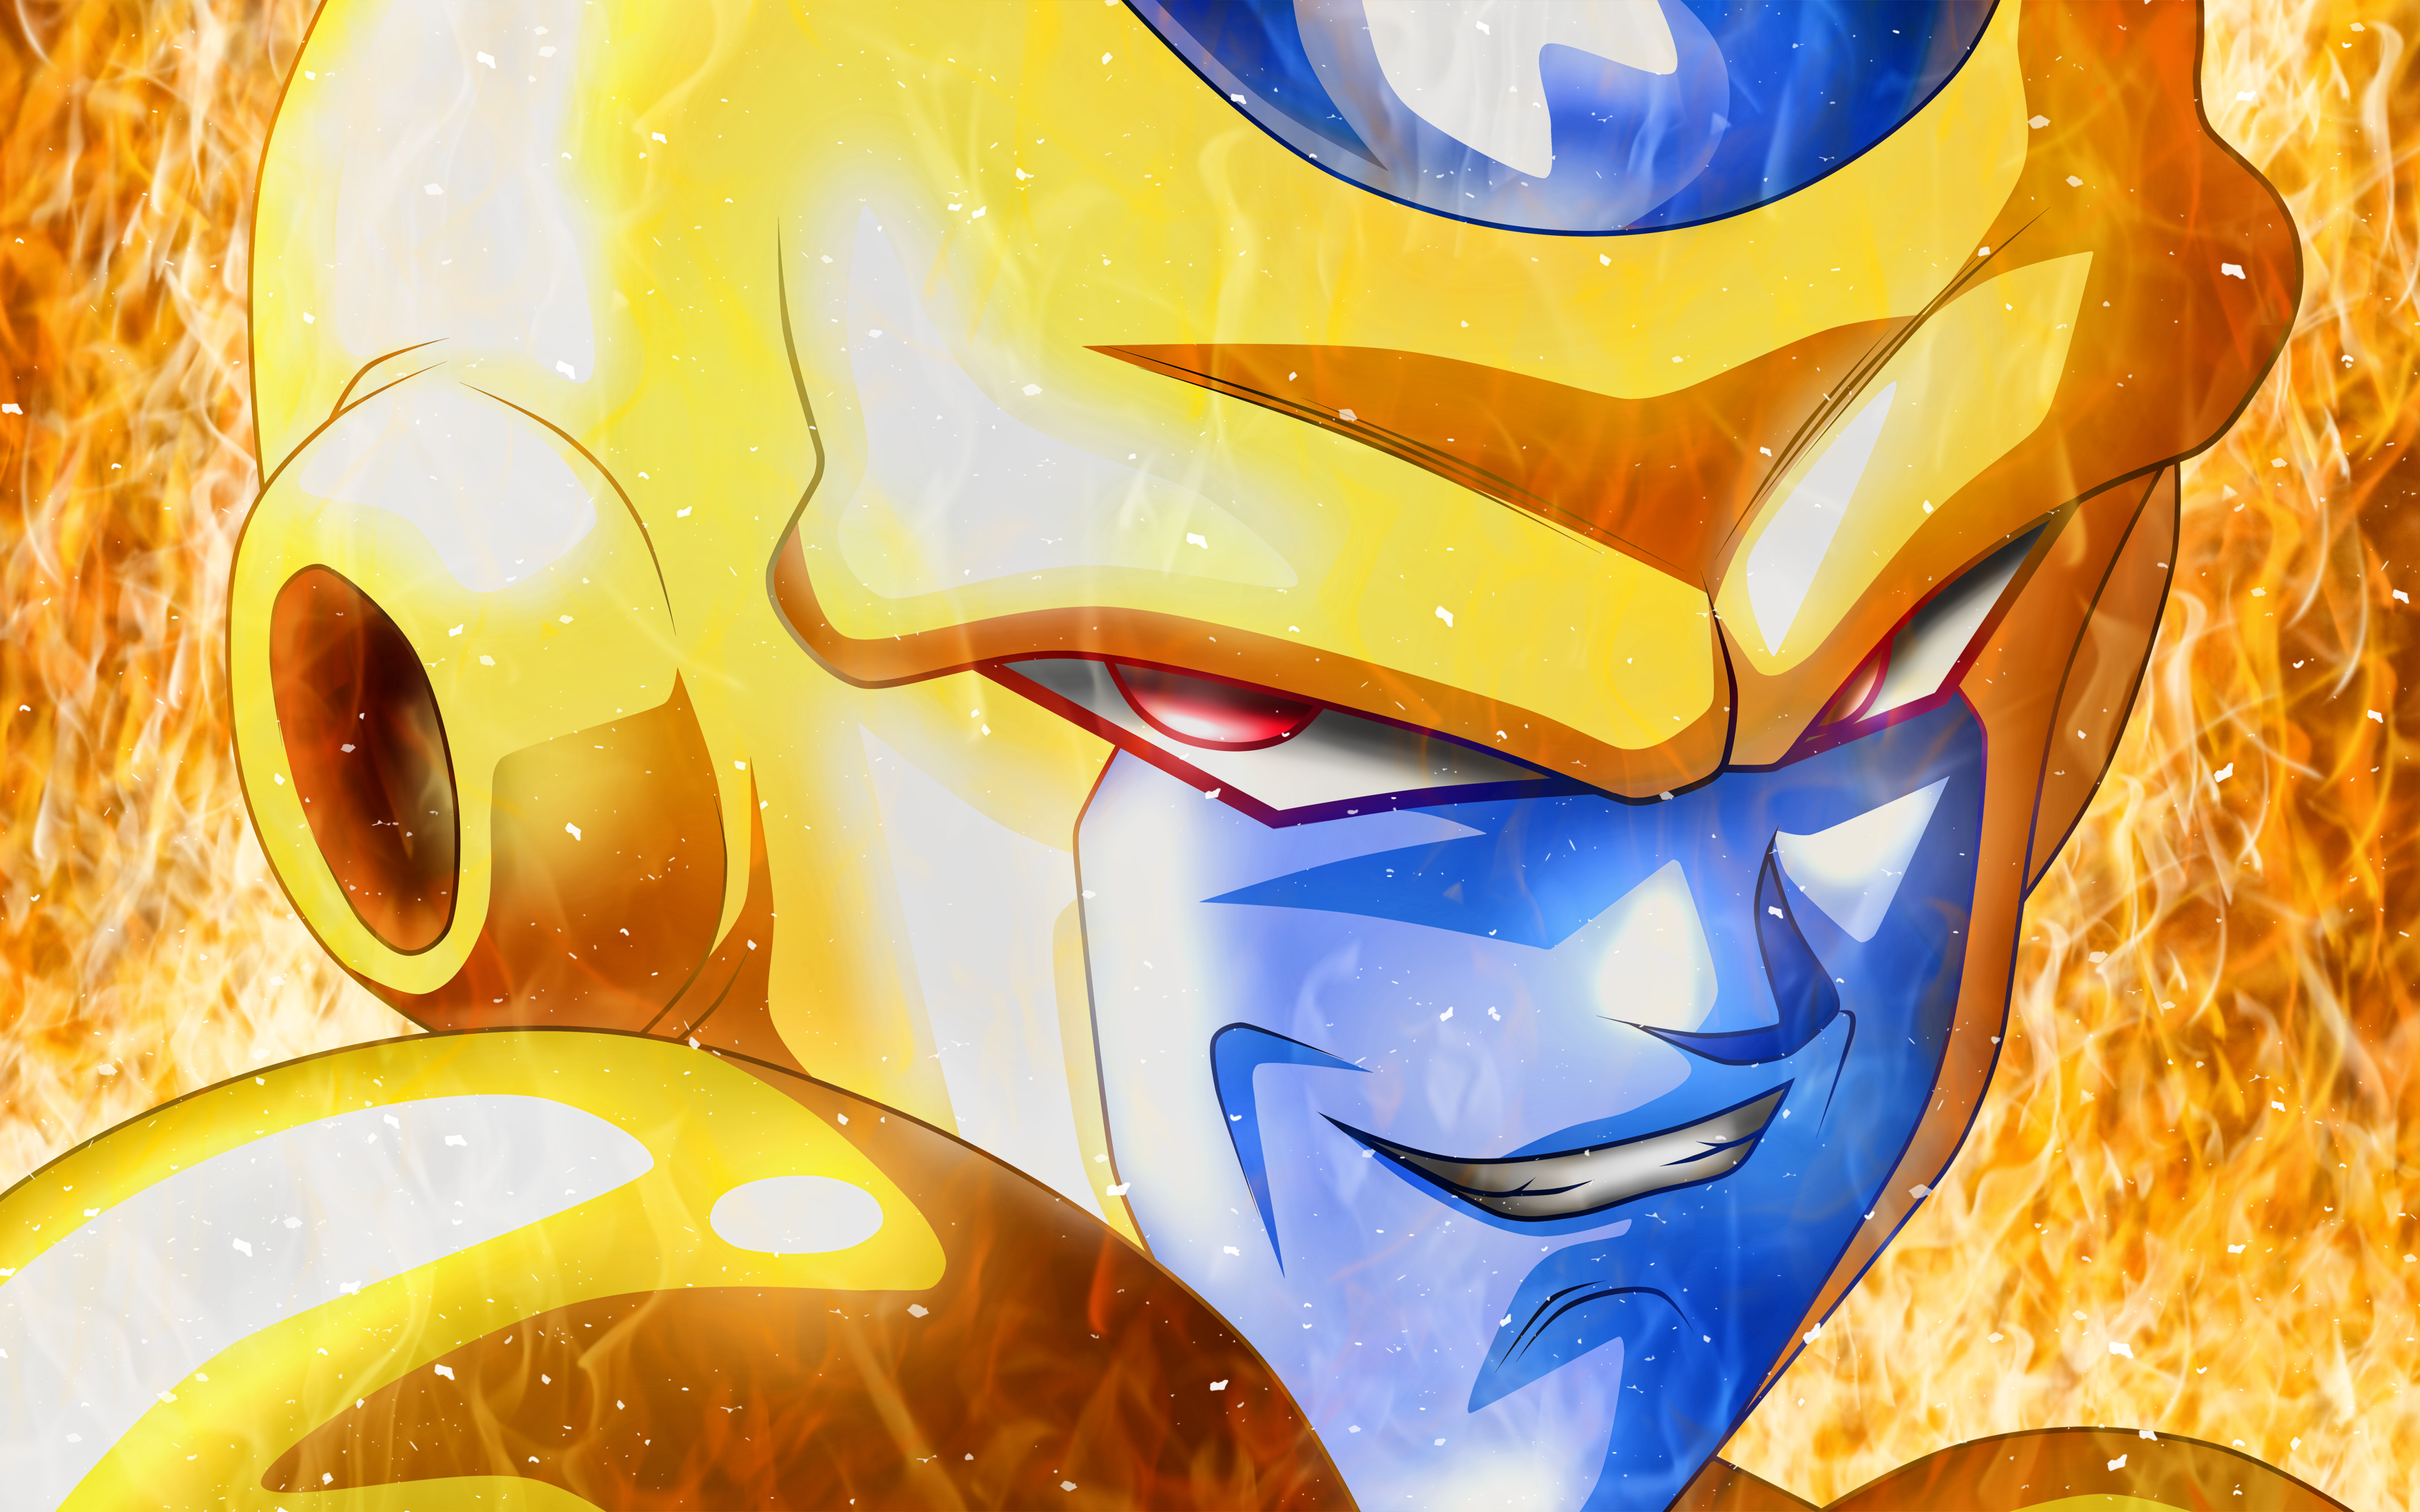 Download Wallpaper Frieza, 4k, Close Up, Dragon Ball, DBS, Dragon Ball Super, Golden Frieza For Desktop With Resolution 3840x2400. High Quality HD Picture Wallpaper